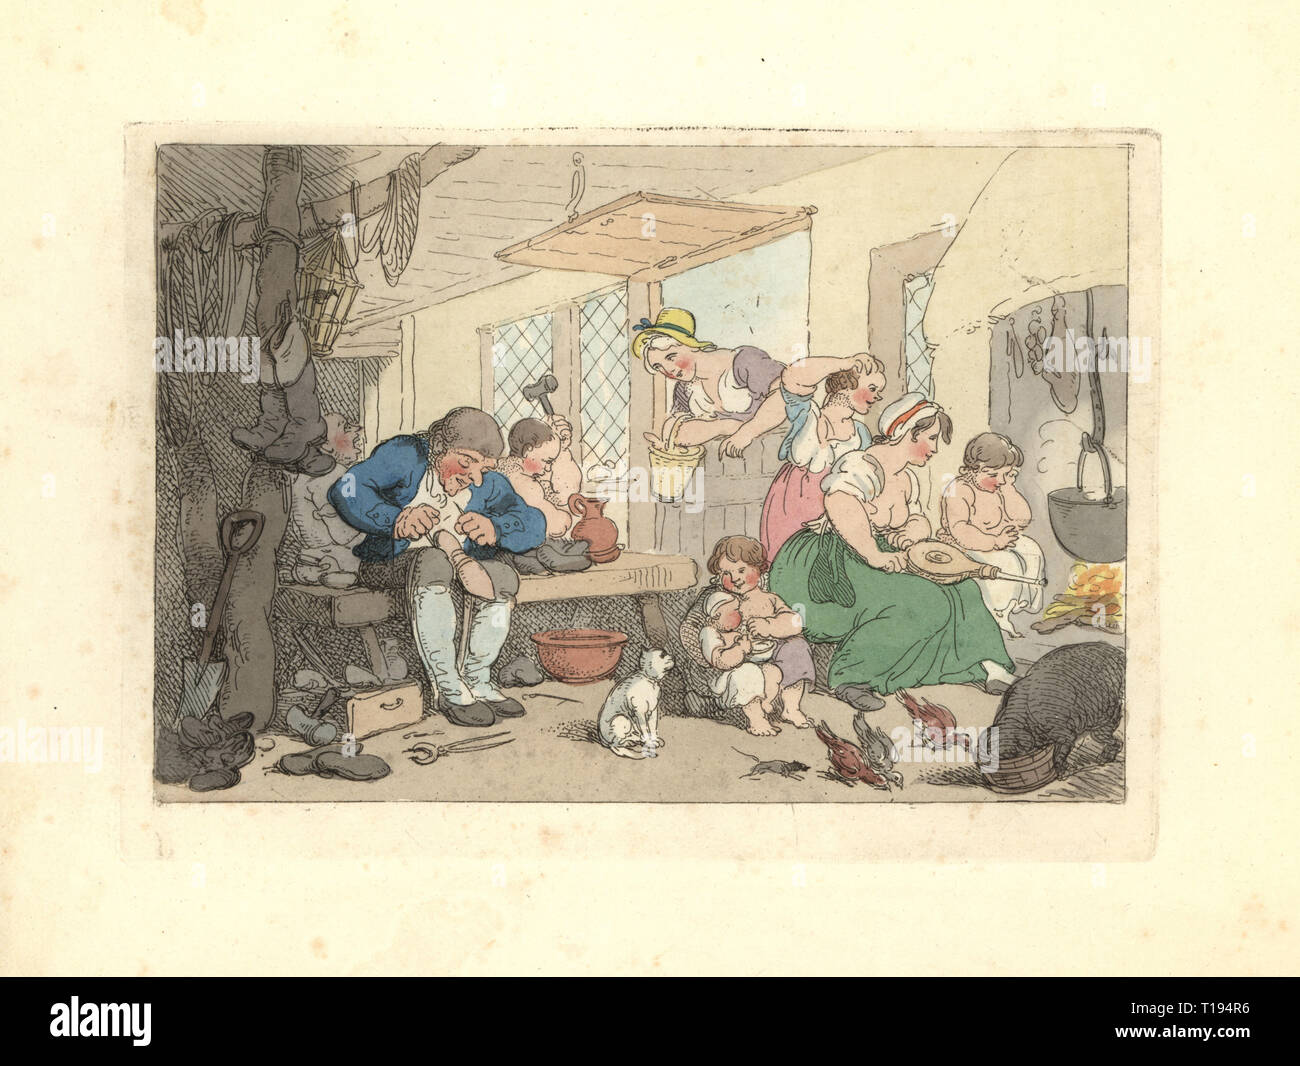 Regency cobbler mending shoes in a room full of women and children. Buxom wife using bellows on the fire in the hearth. Handcoloured copperplate engraving designed and etched by Thomas Rowlandson to accompany Reverend James Beresford’s Miseries of Human Life, Ackermann, 1808. Stock Photo